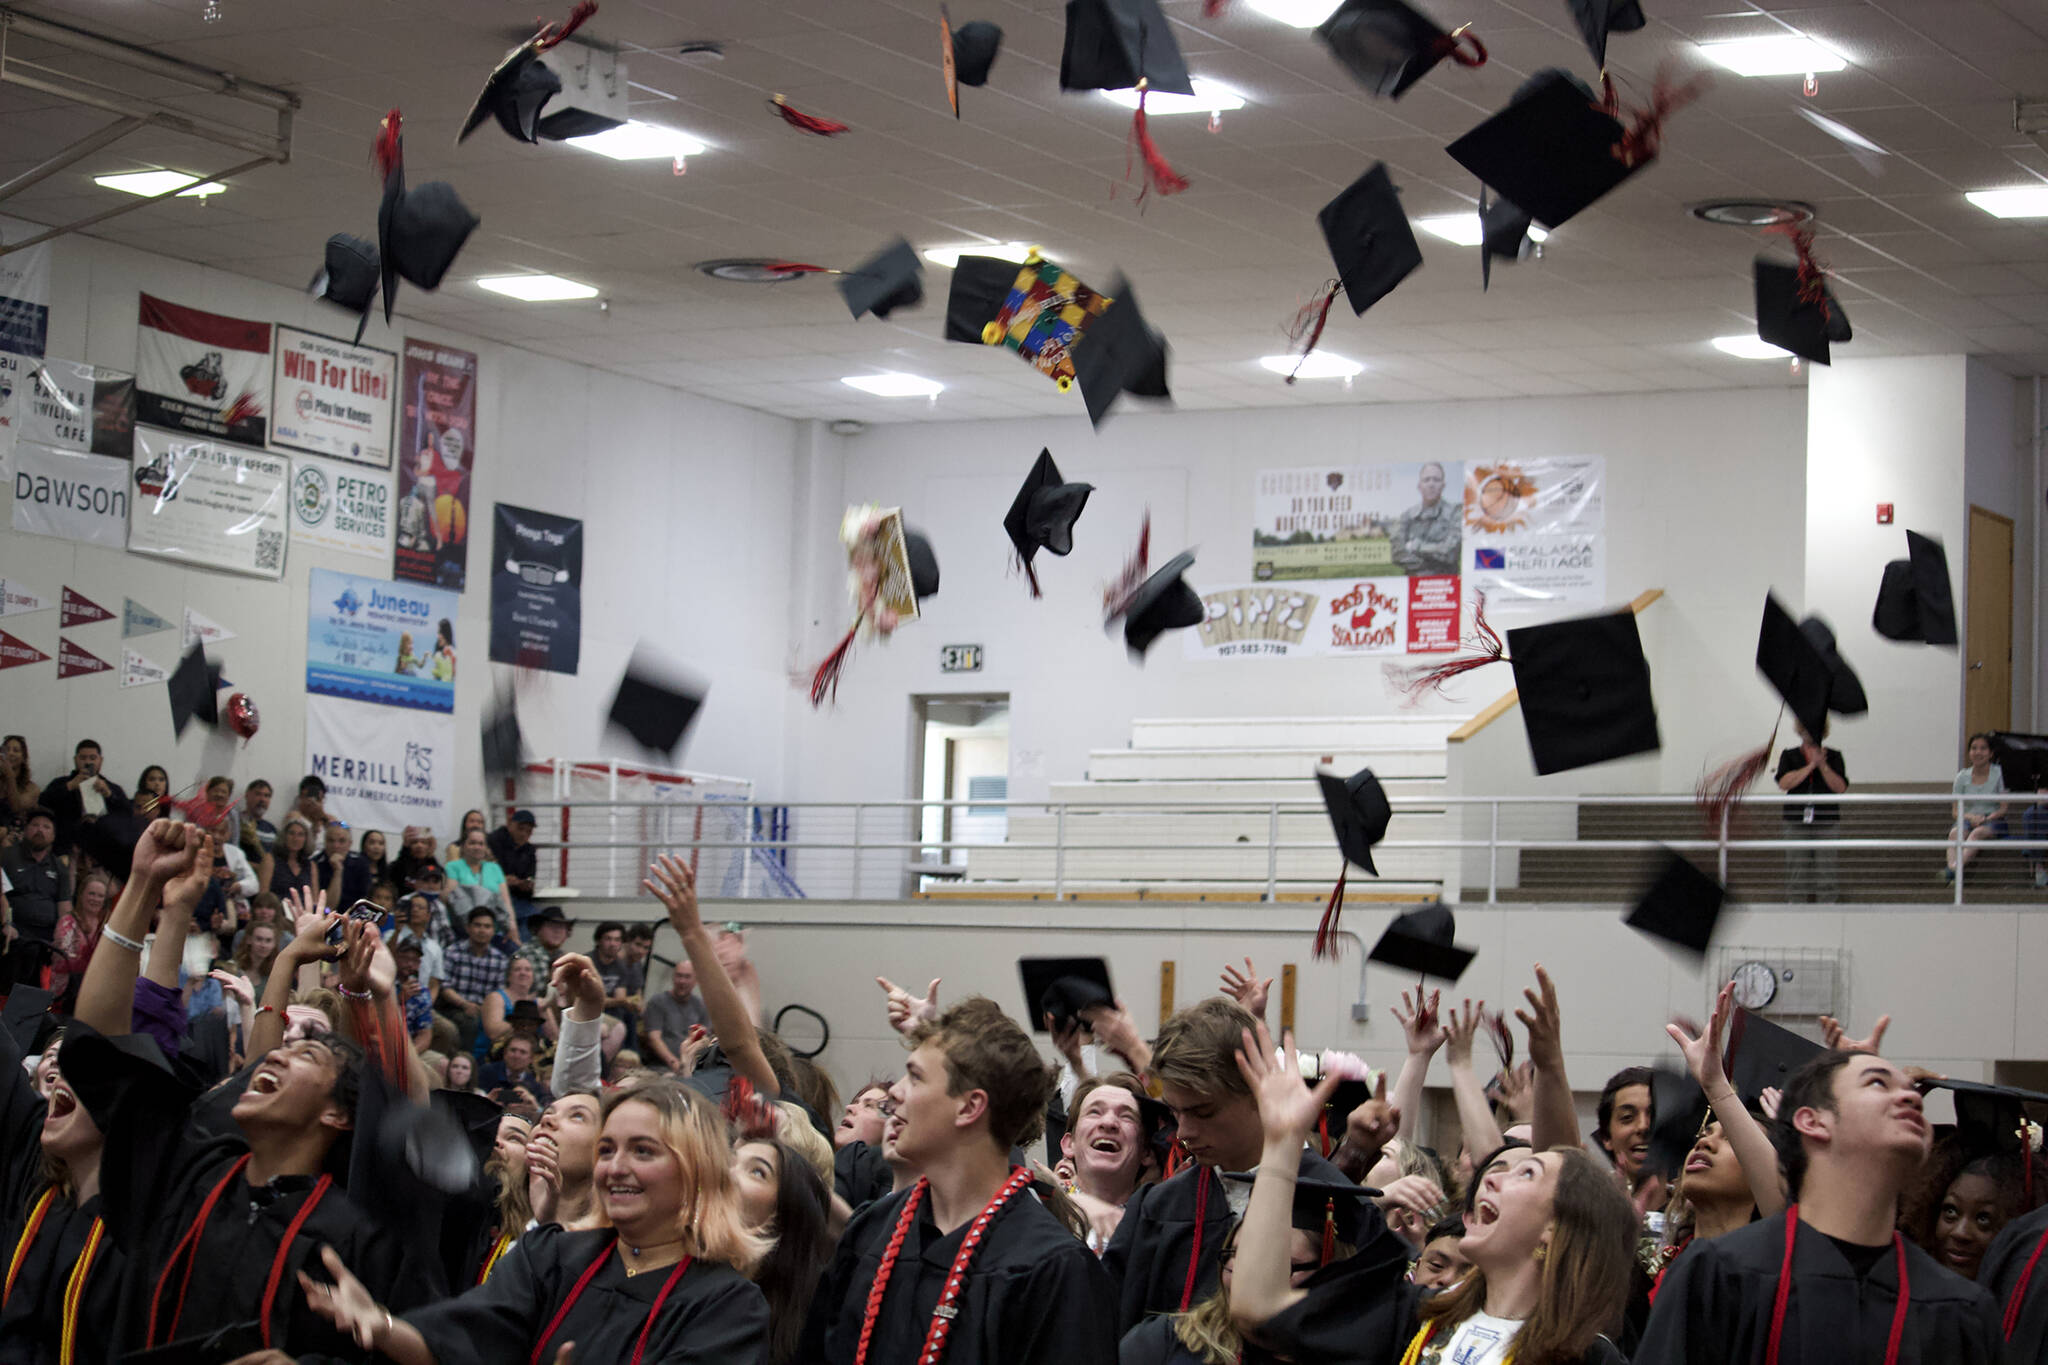 Juneau-Douglas High School: Yadaa.at Kalé graduates toss their caps during graduation last month. The Juneau School District Board of Education approved on Friday a policy formally allowing students to wear regalia during graduation. (Mark Sabbatini / Juneau Empire)